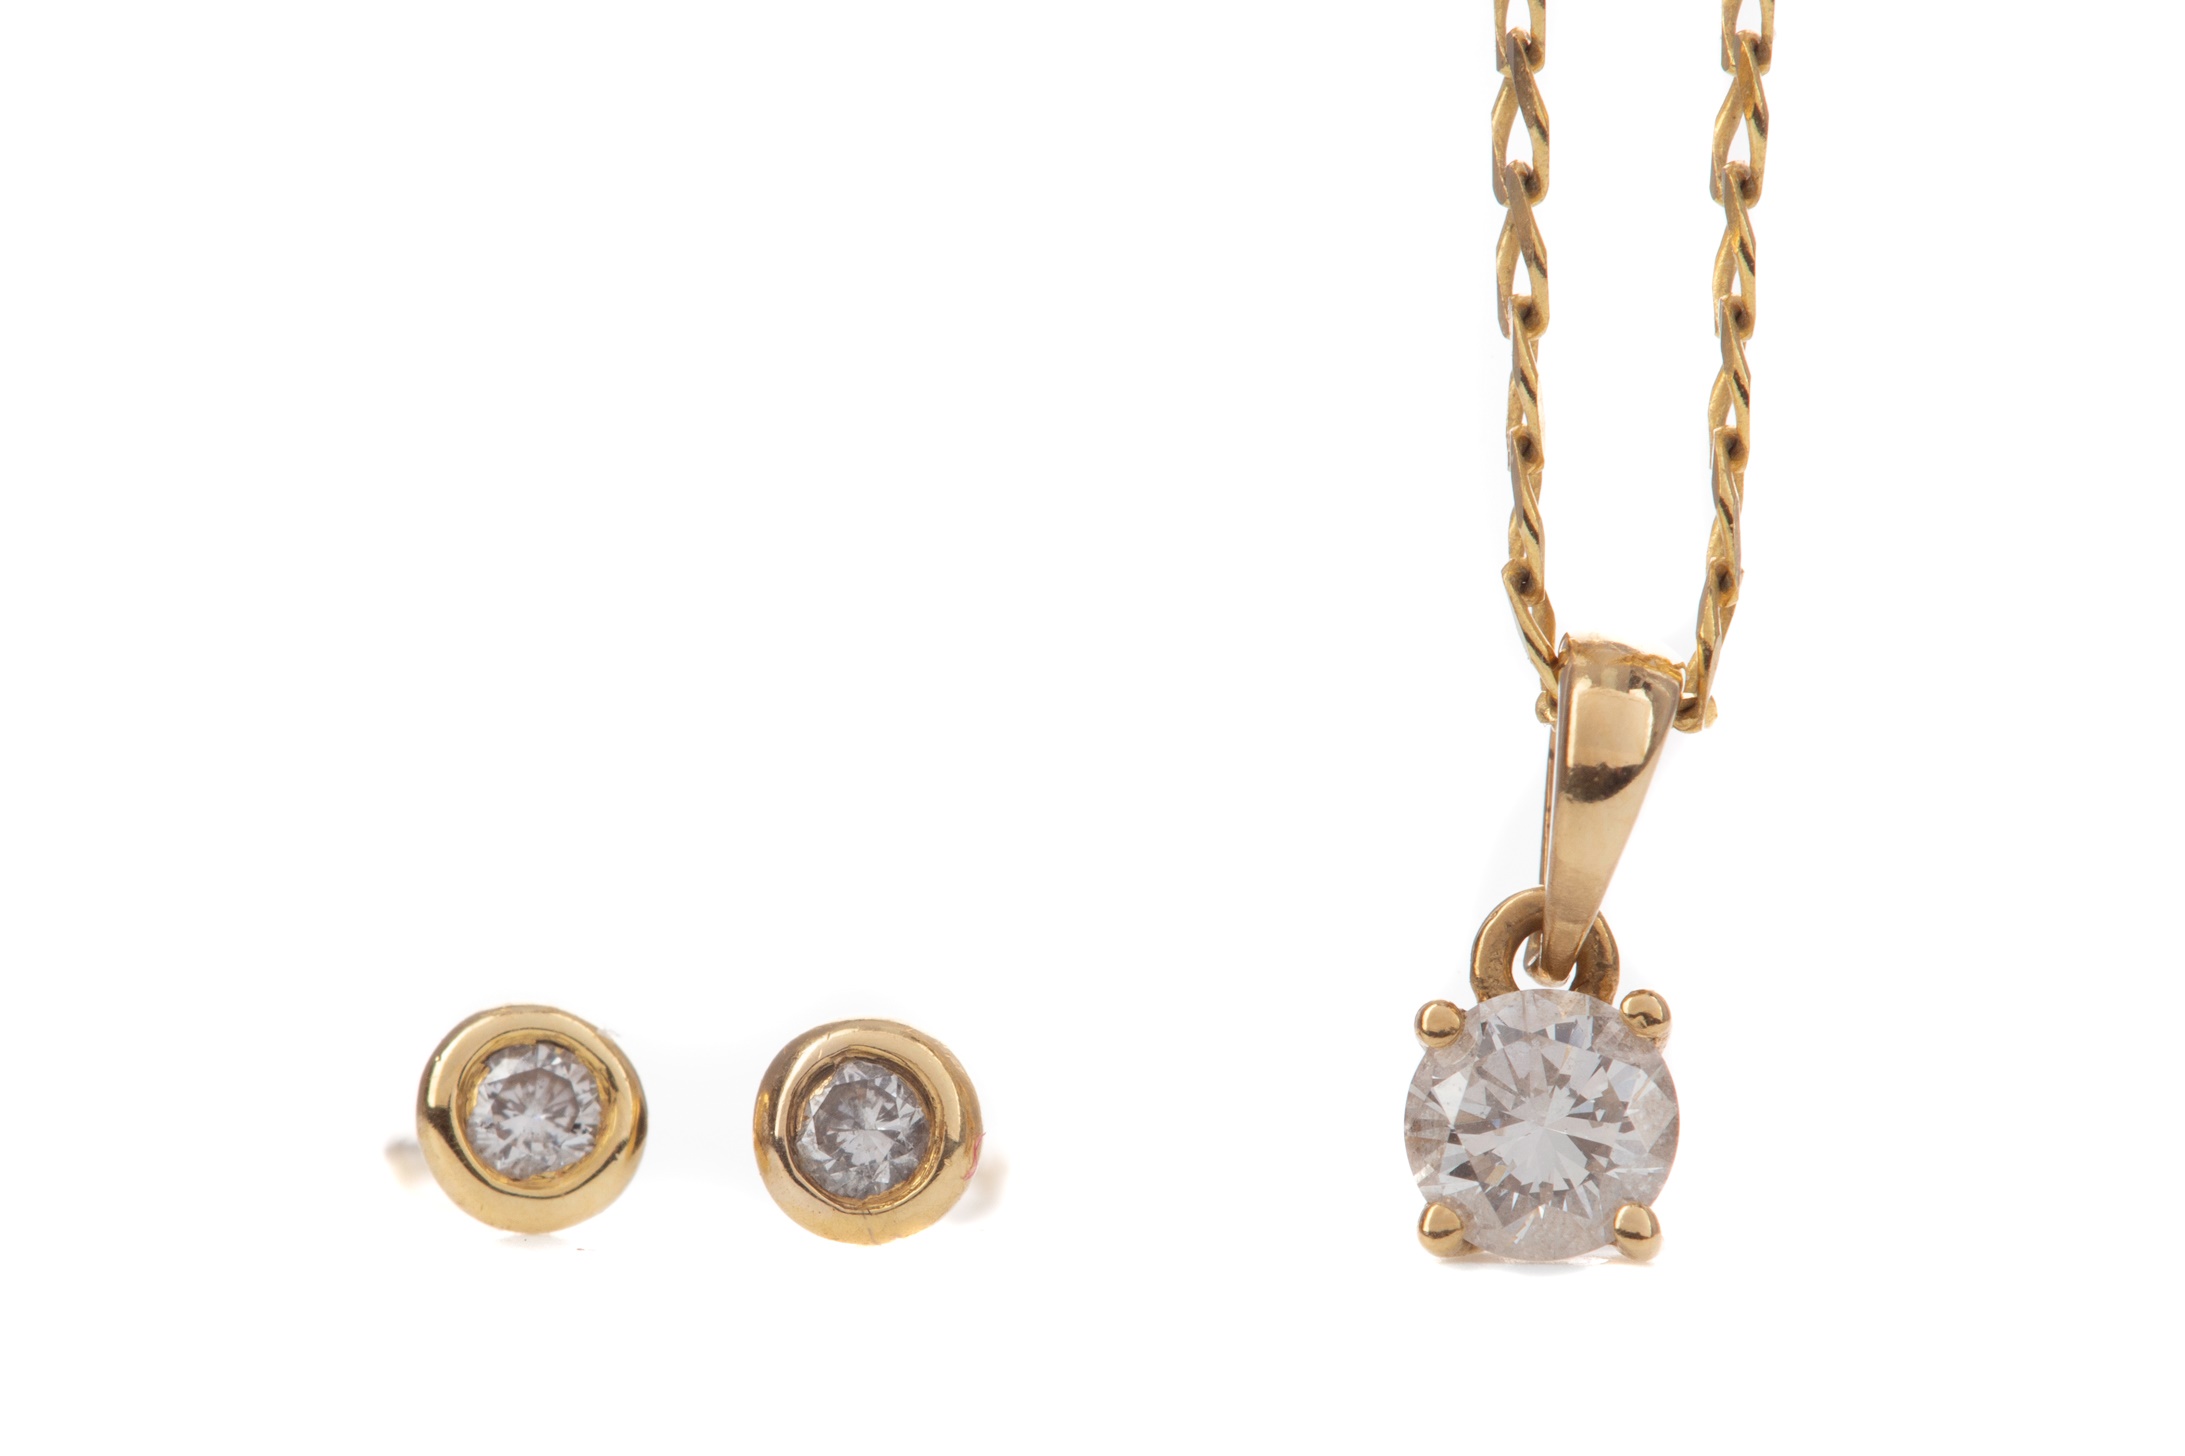 A PAIR OF DIAMOND EARRINGS AND A PENDANT